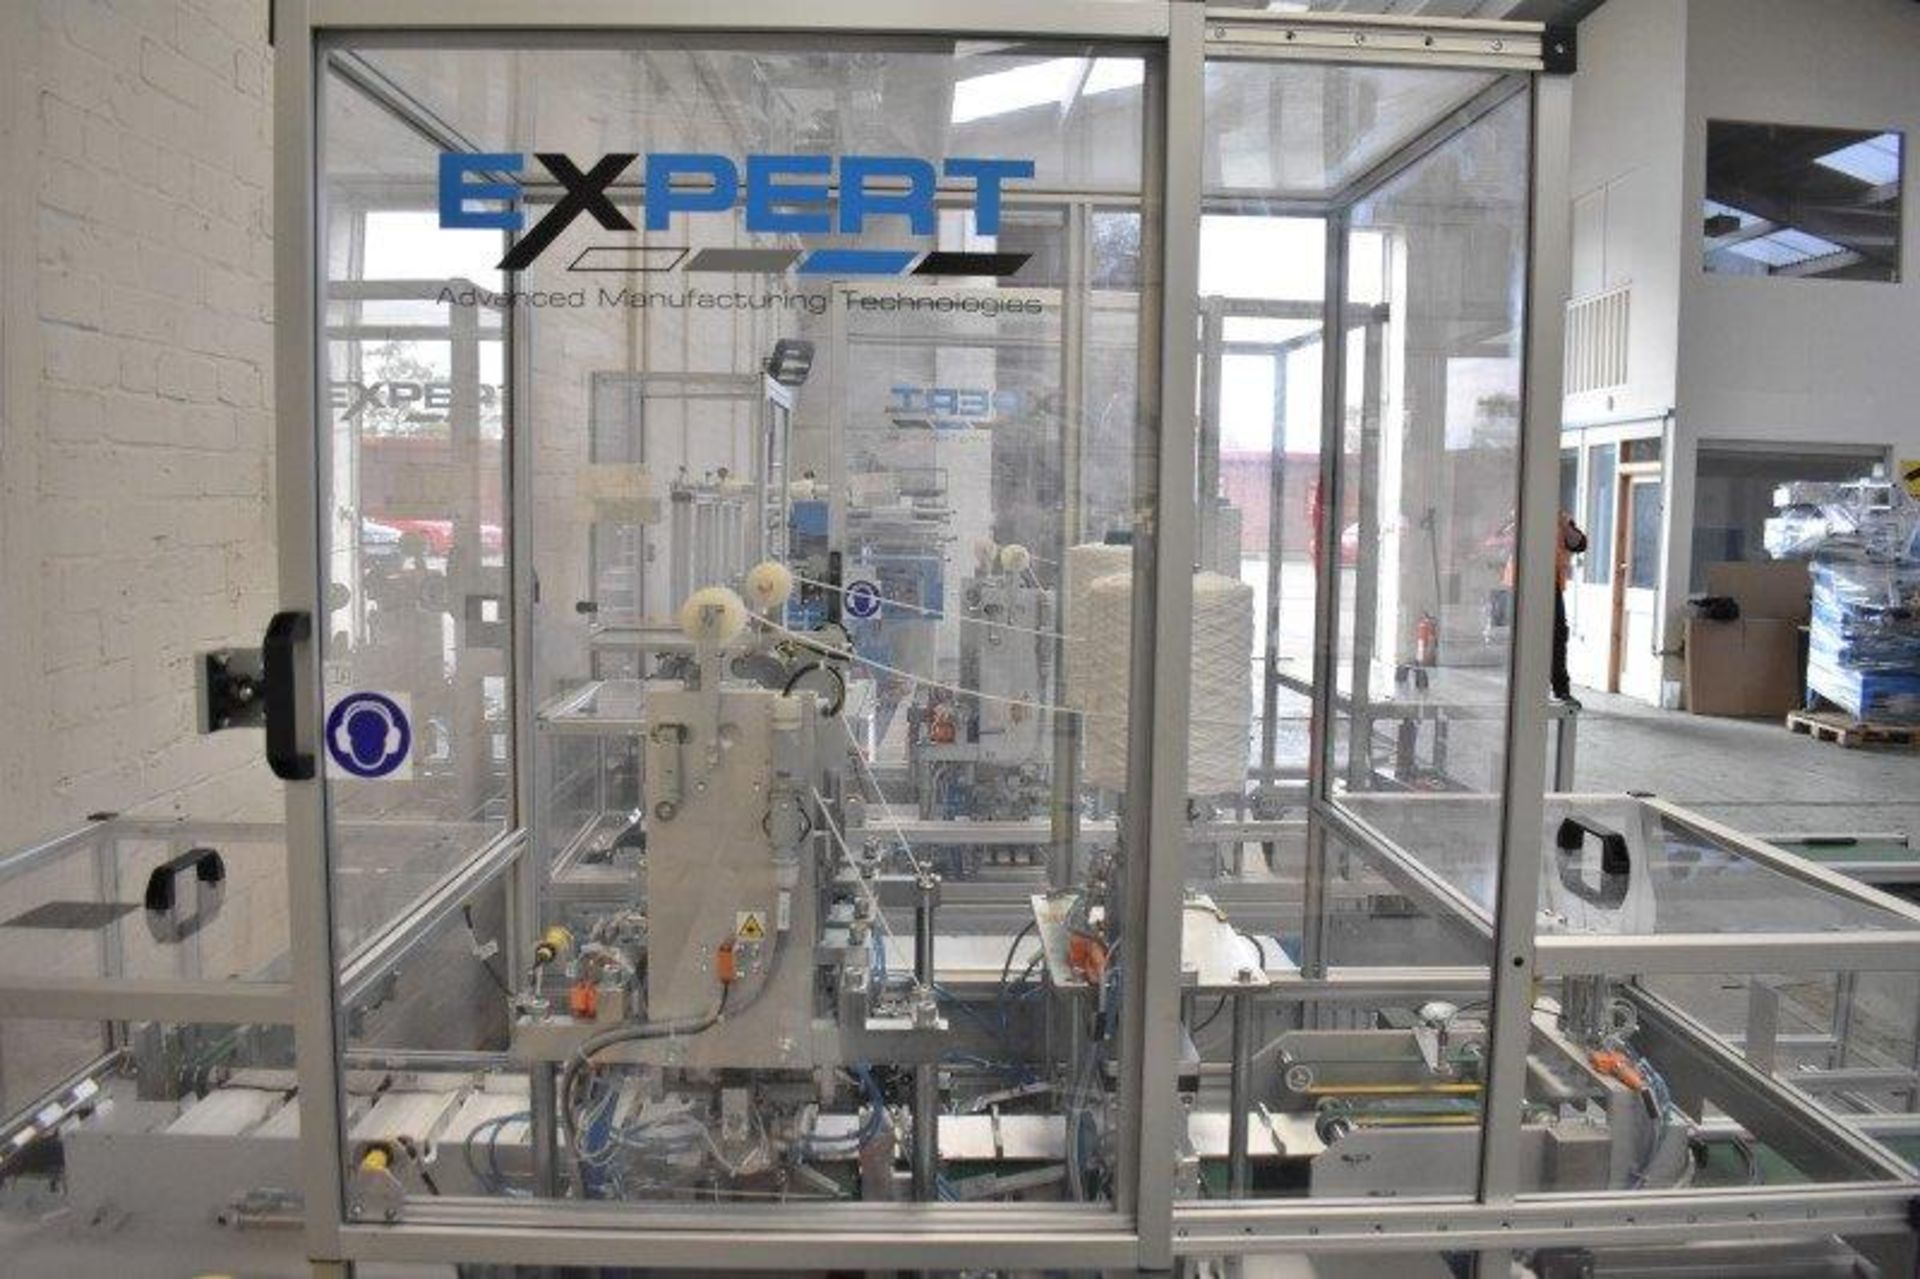 Expert fully automated Mask Making Machine including an Ilapak Smart flow wrapping packaging machine - Image 19 of 28